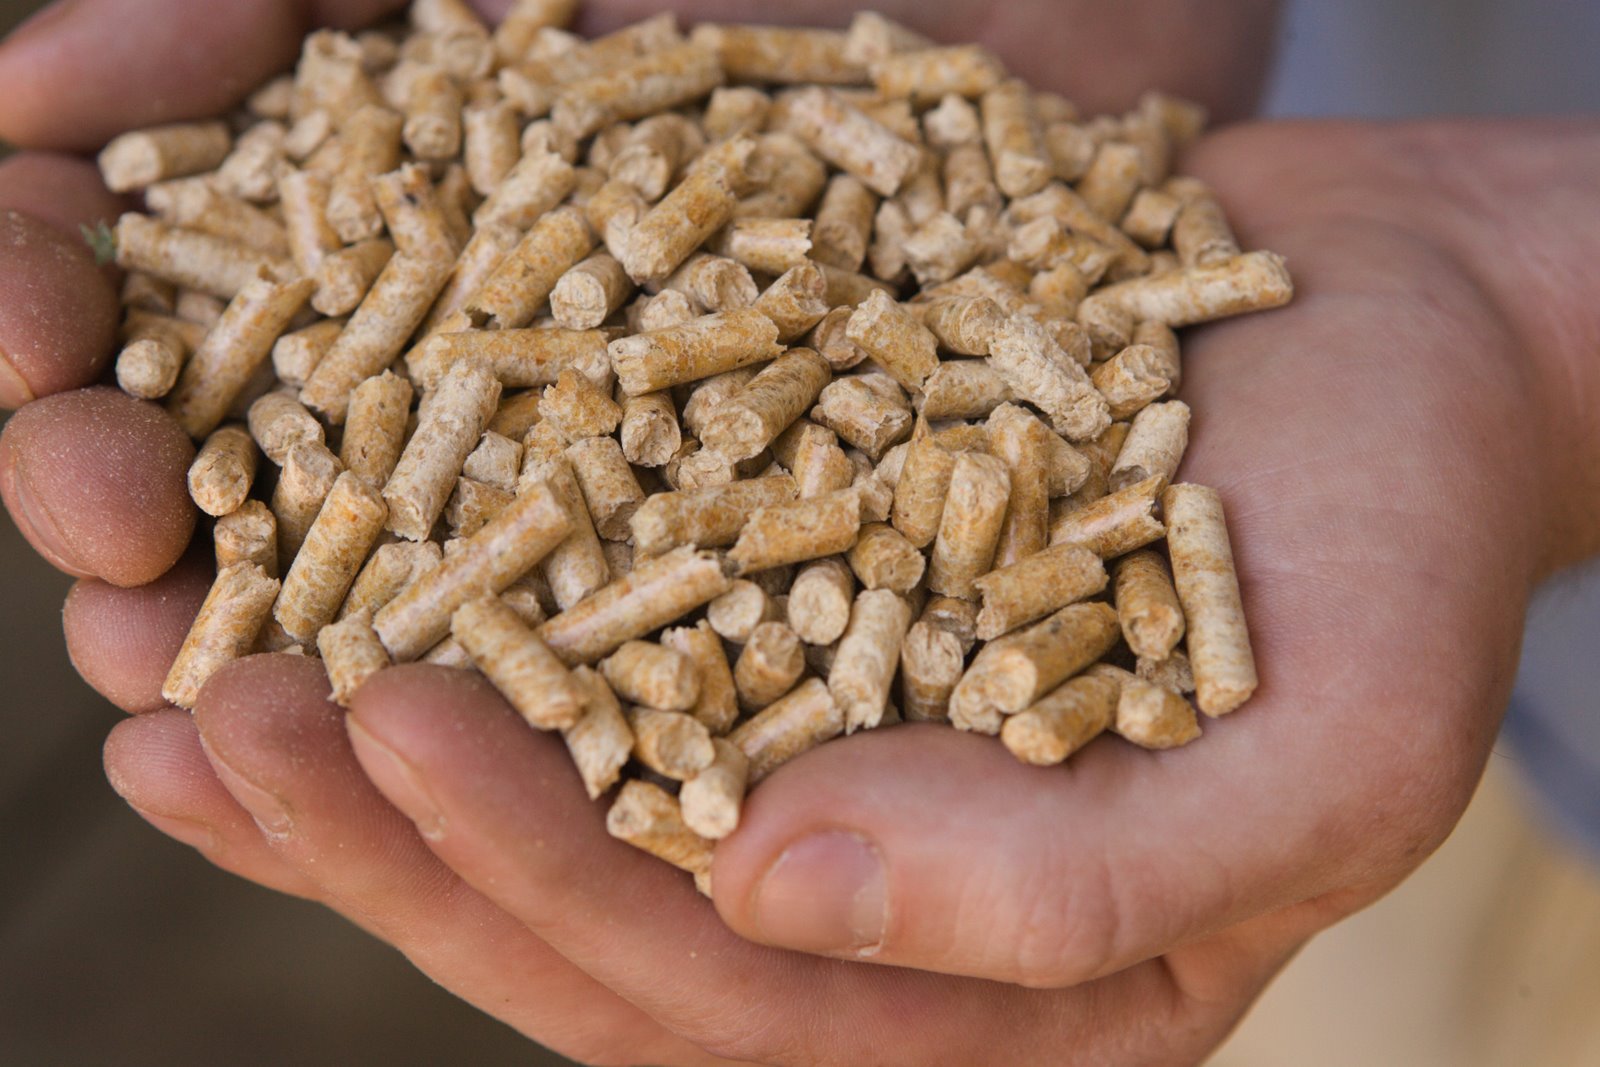 Russian War Has Tripled Wood Pellet Prices